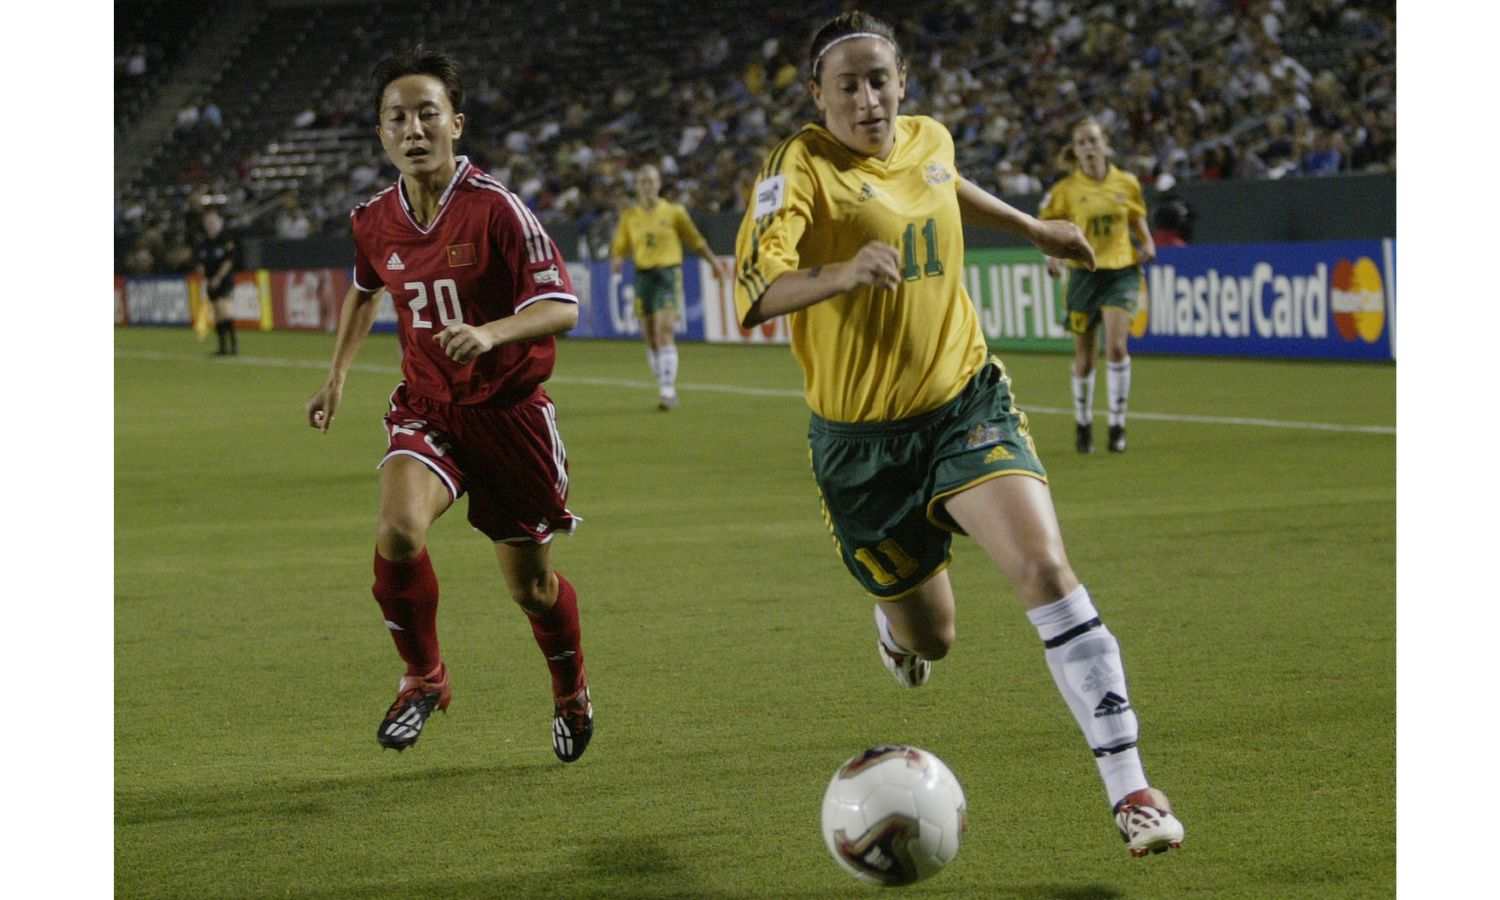 An image of Hether Garriock playing for the Matildas